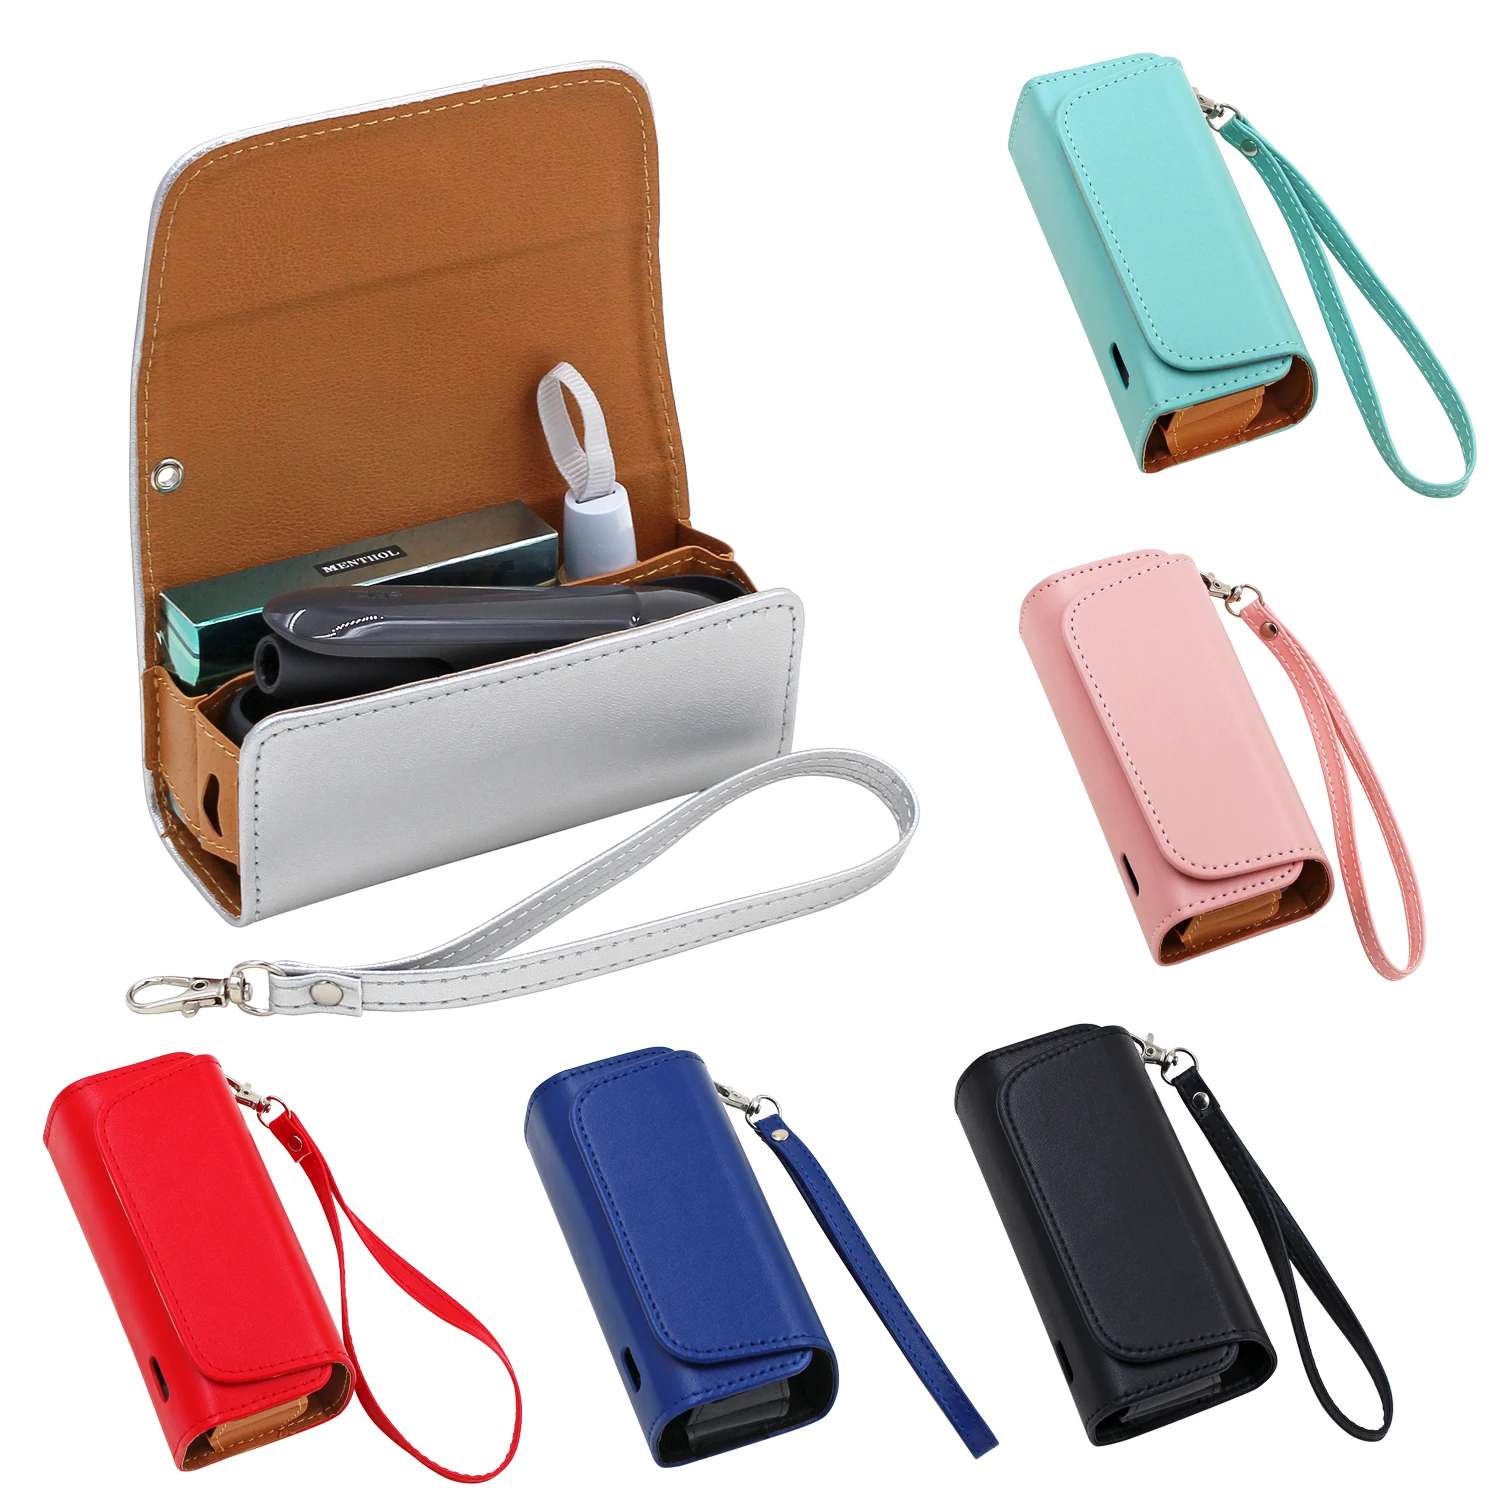 

Flip Double Book Pouch Bag Holder Cover for IQOS 3 3.0 Duo Wallet Leather Case Cigarette Accessories